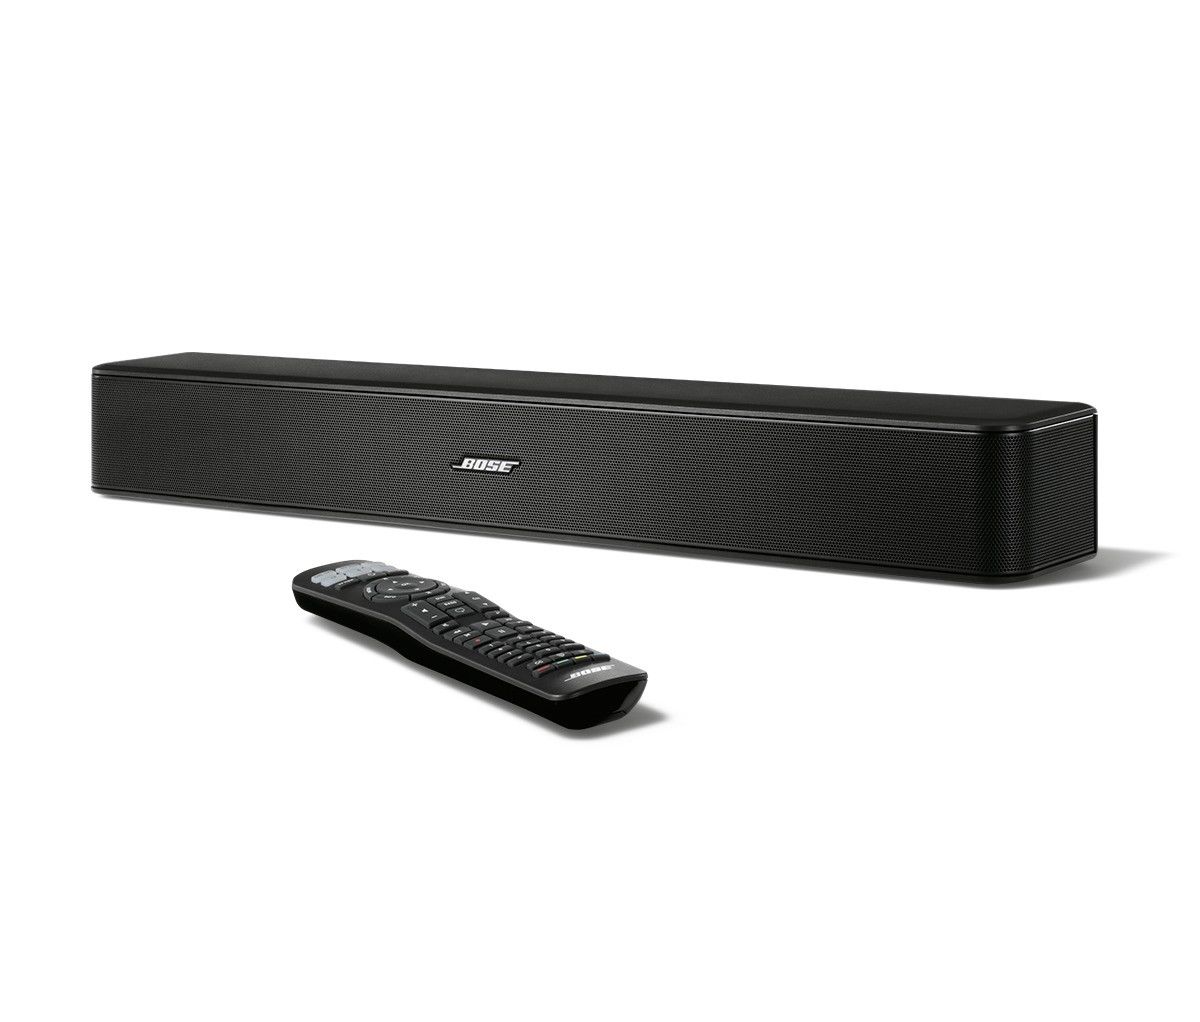 Bose refurbished Solo 5 TV sound system for $129, free shipping